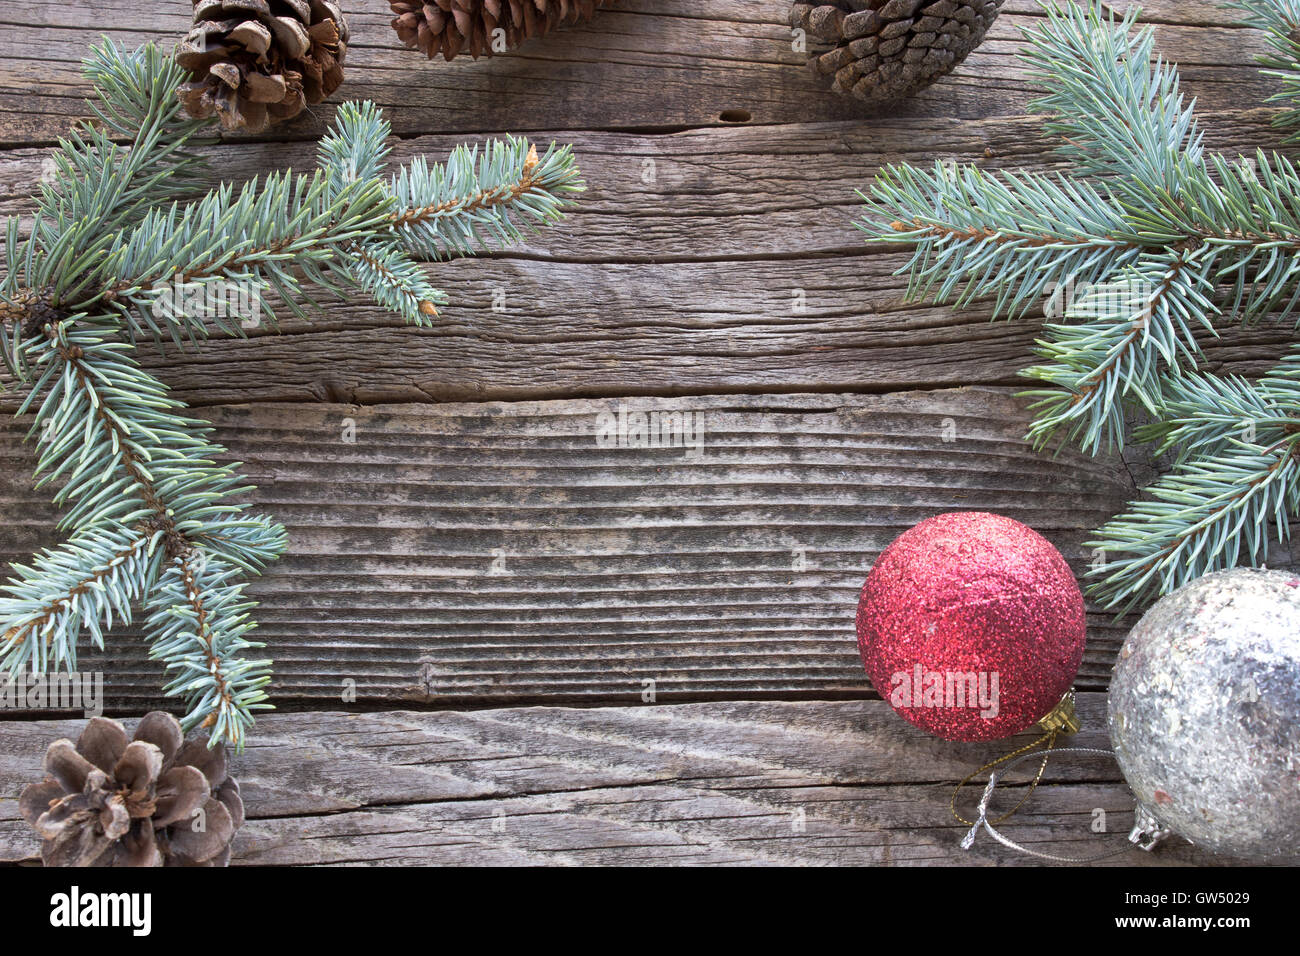 Pine cones, needles and Christmas balls on wooden background Stock Photo